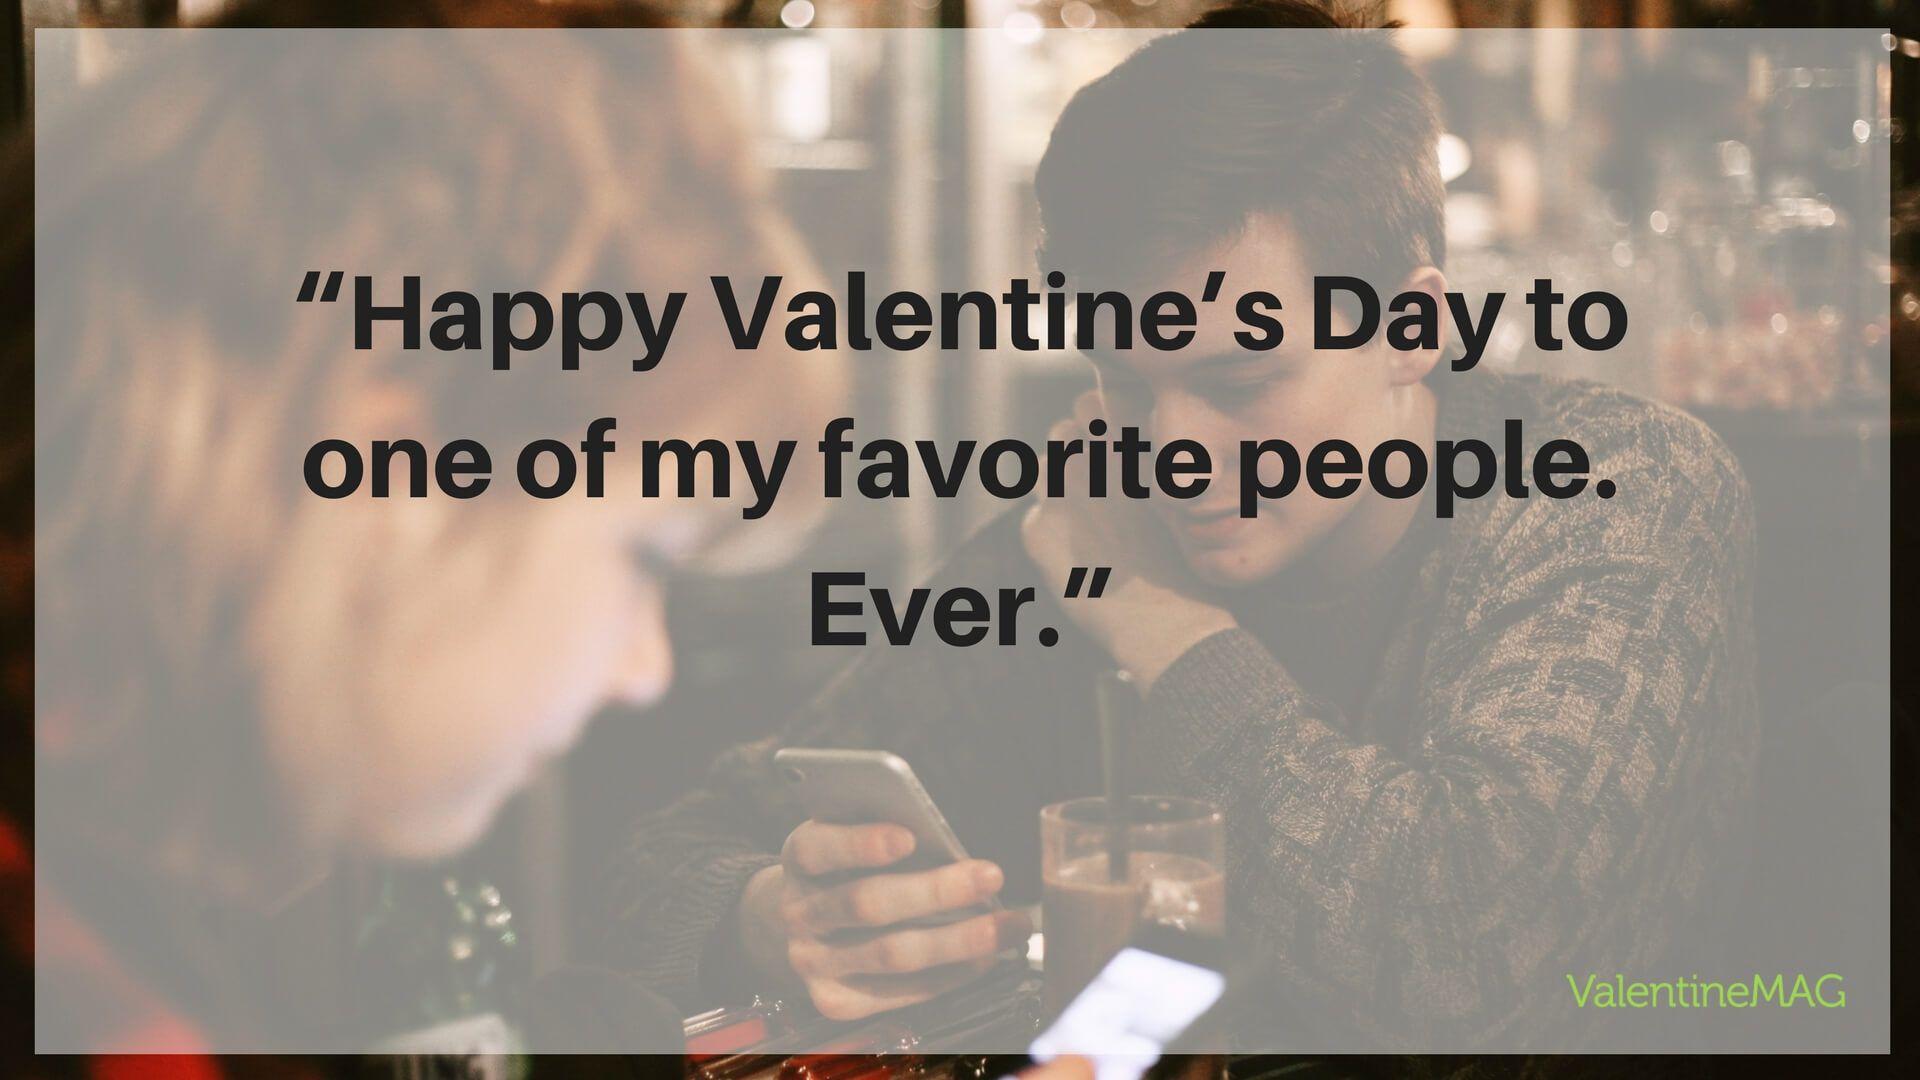 Happy Valentines Day 2019 With Friends (image With Quotes)